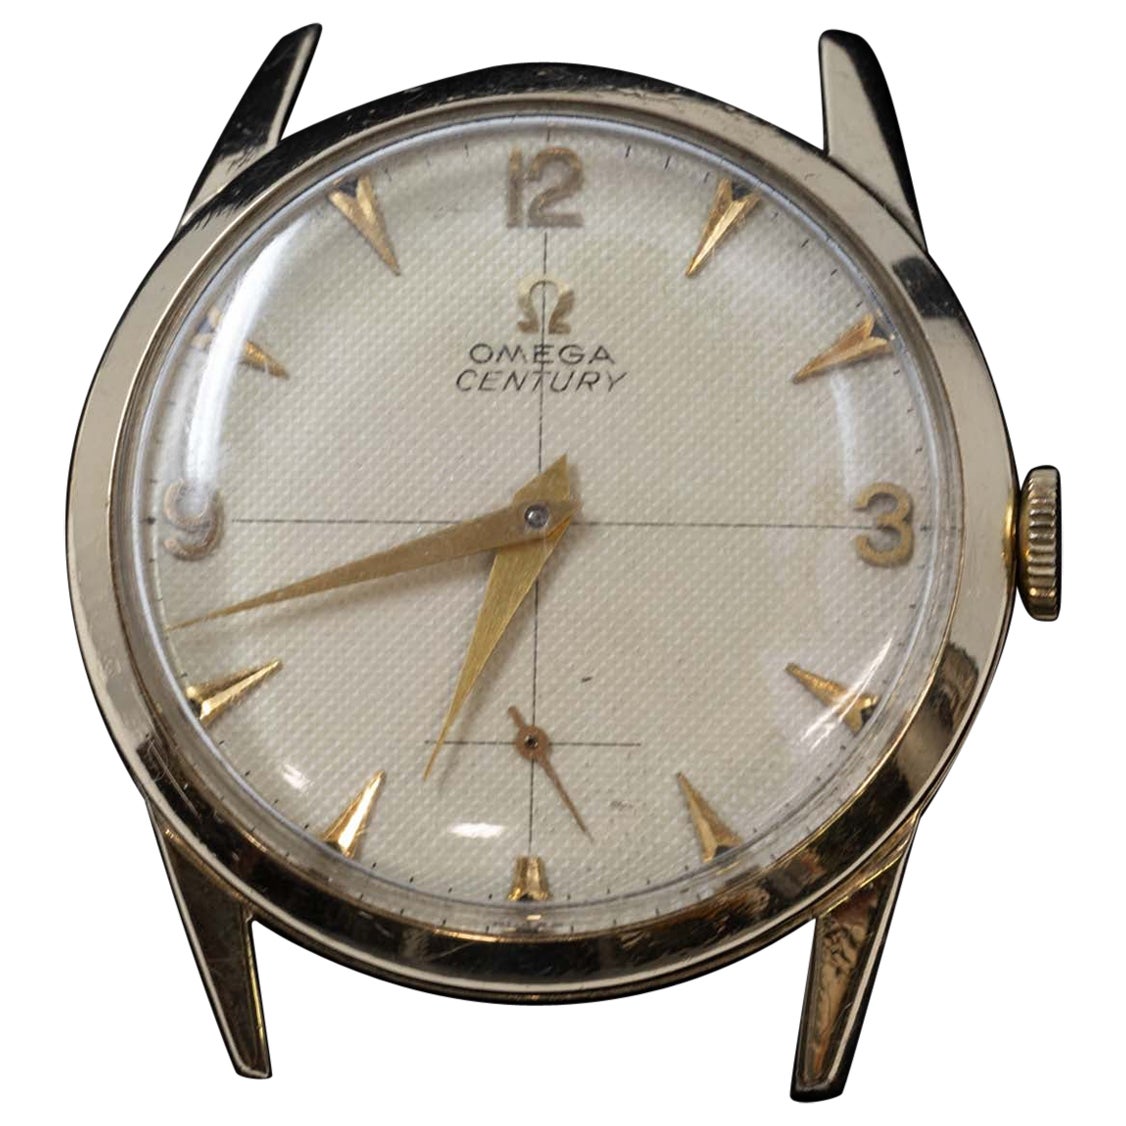 Omega Century 10k Gold-Filled Manual Winding Watch